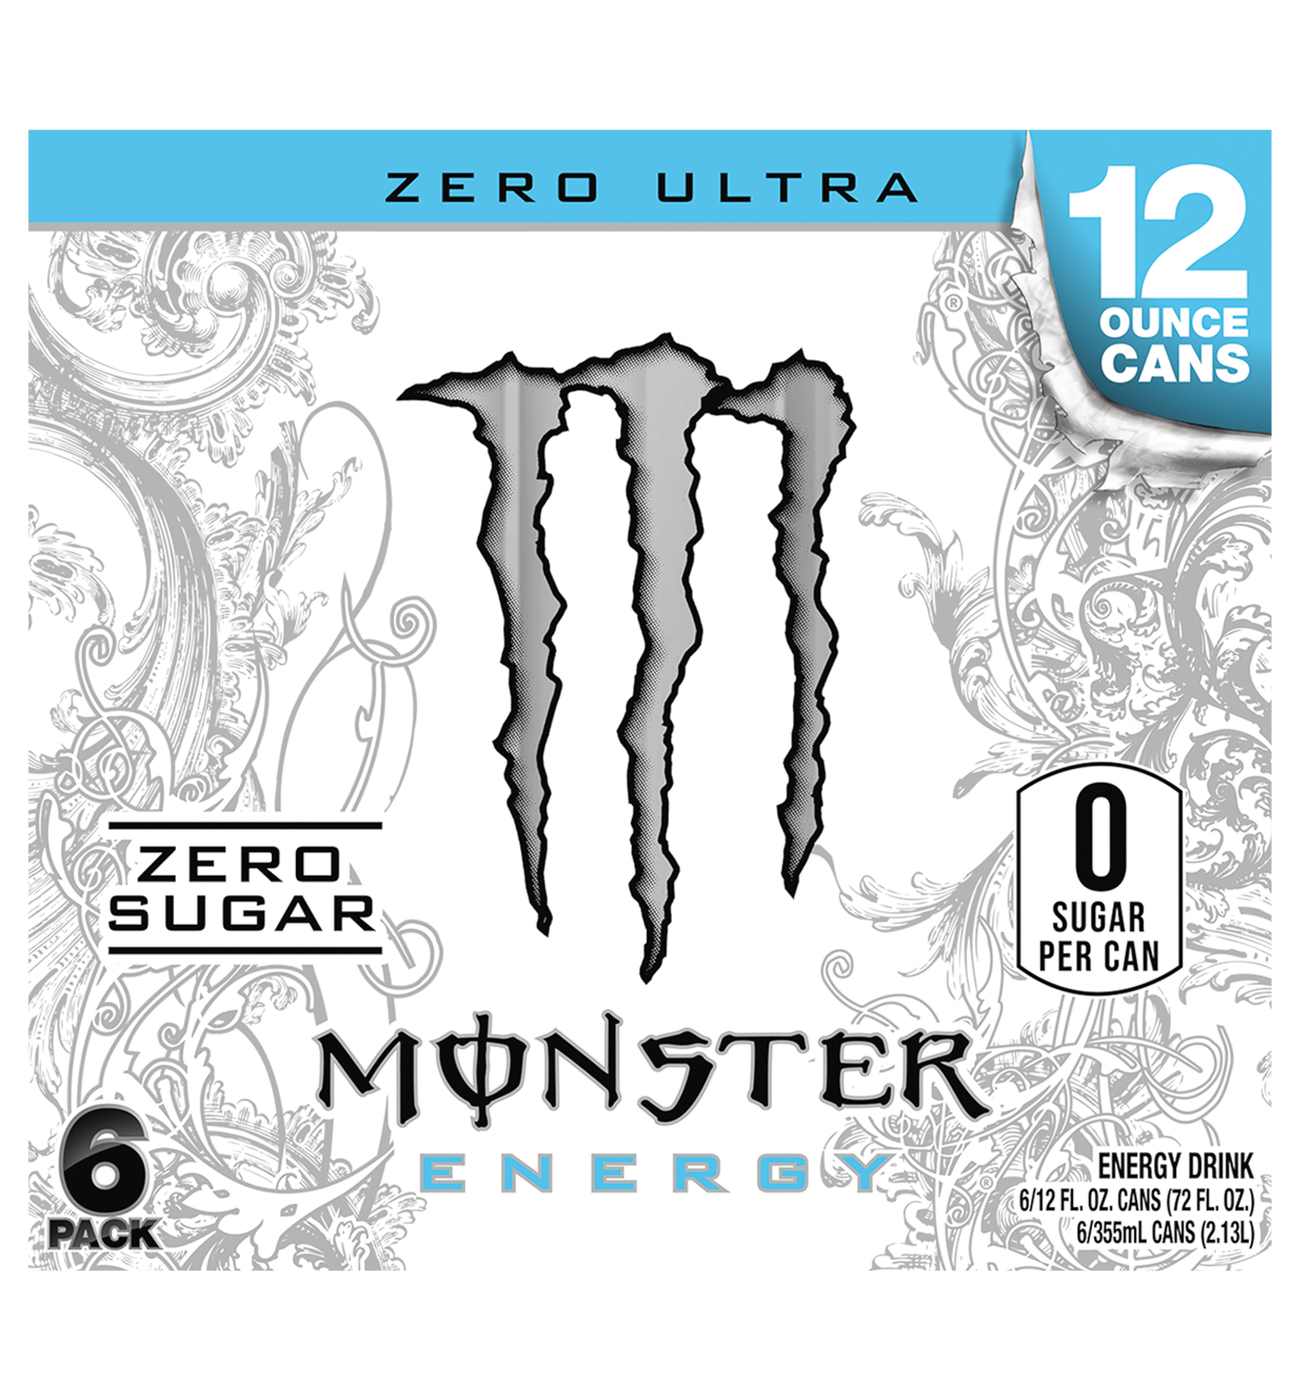 Monster Energy Zero Ultra Sugar Free Energy Drink 12 oz Cans; image 1 of 3